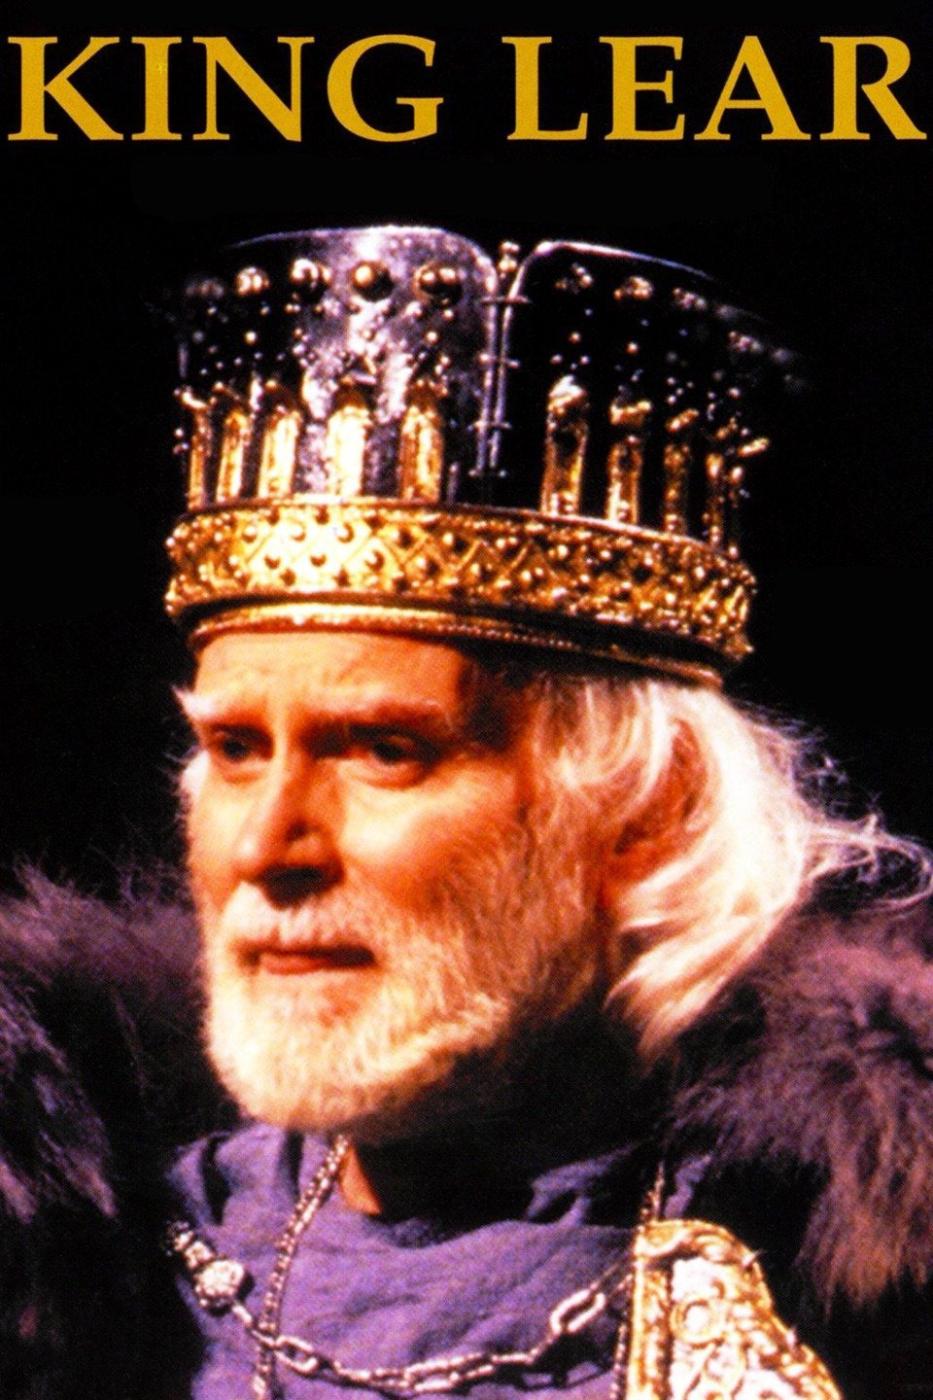 What is the Significance of the Ending of King Lear?